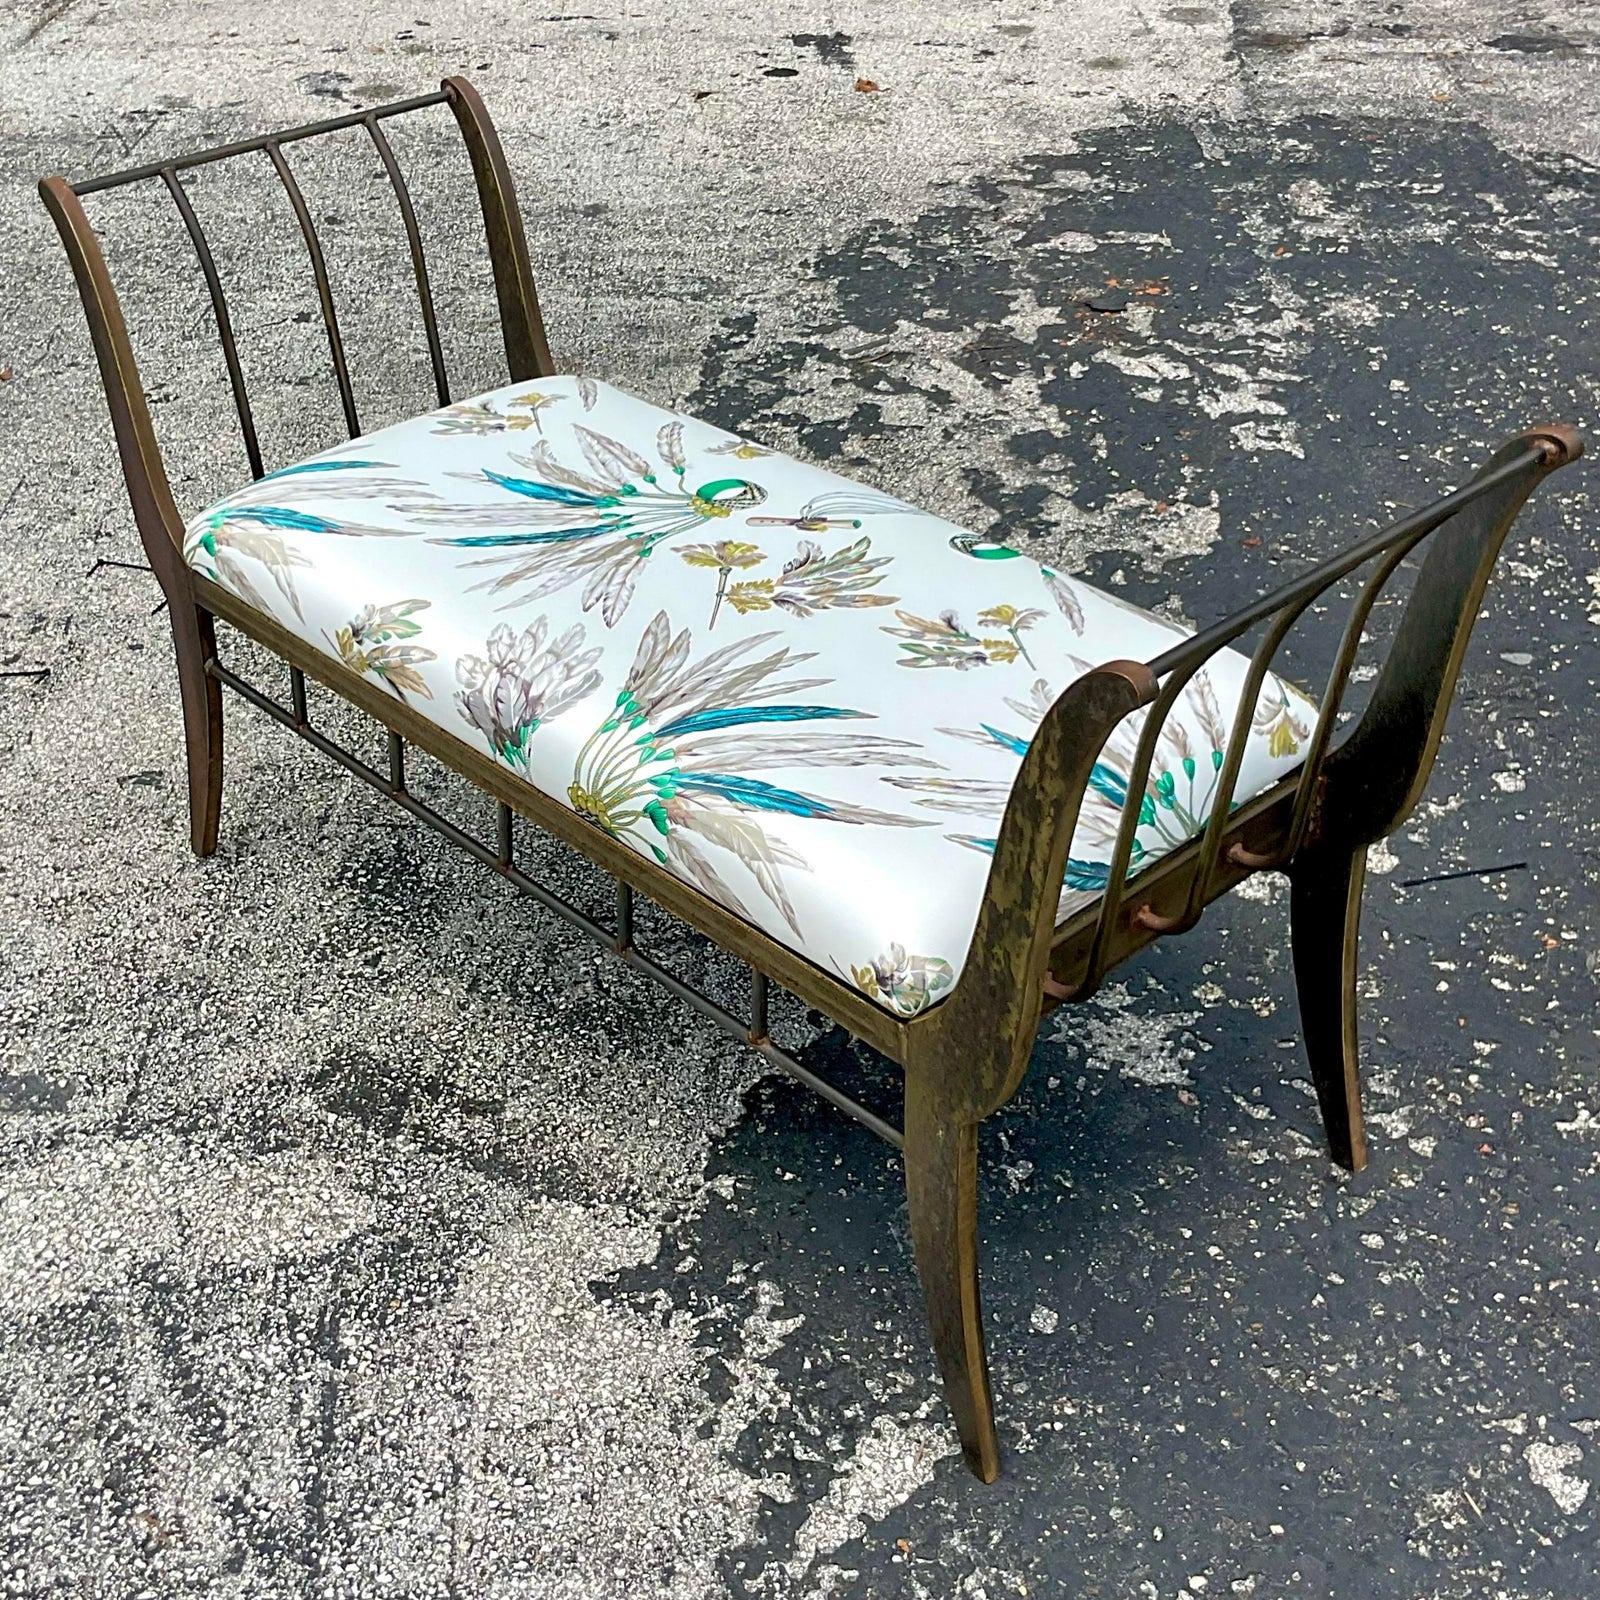 A fantastic vintage Boho bench. A chic bronze bench with a high sides design. Upholstered in Hermes silk/satin fabric. Truly amazing. Acquired from a Palm Beach estate.